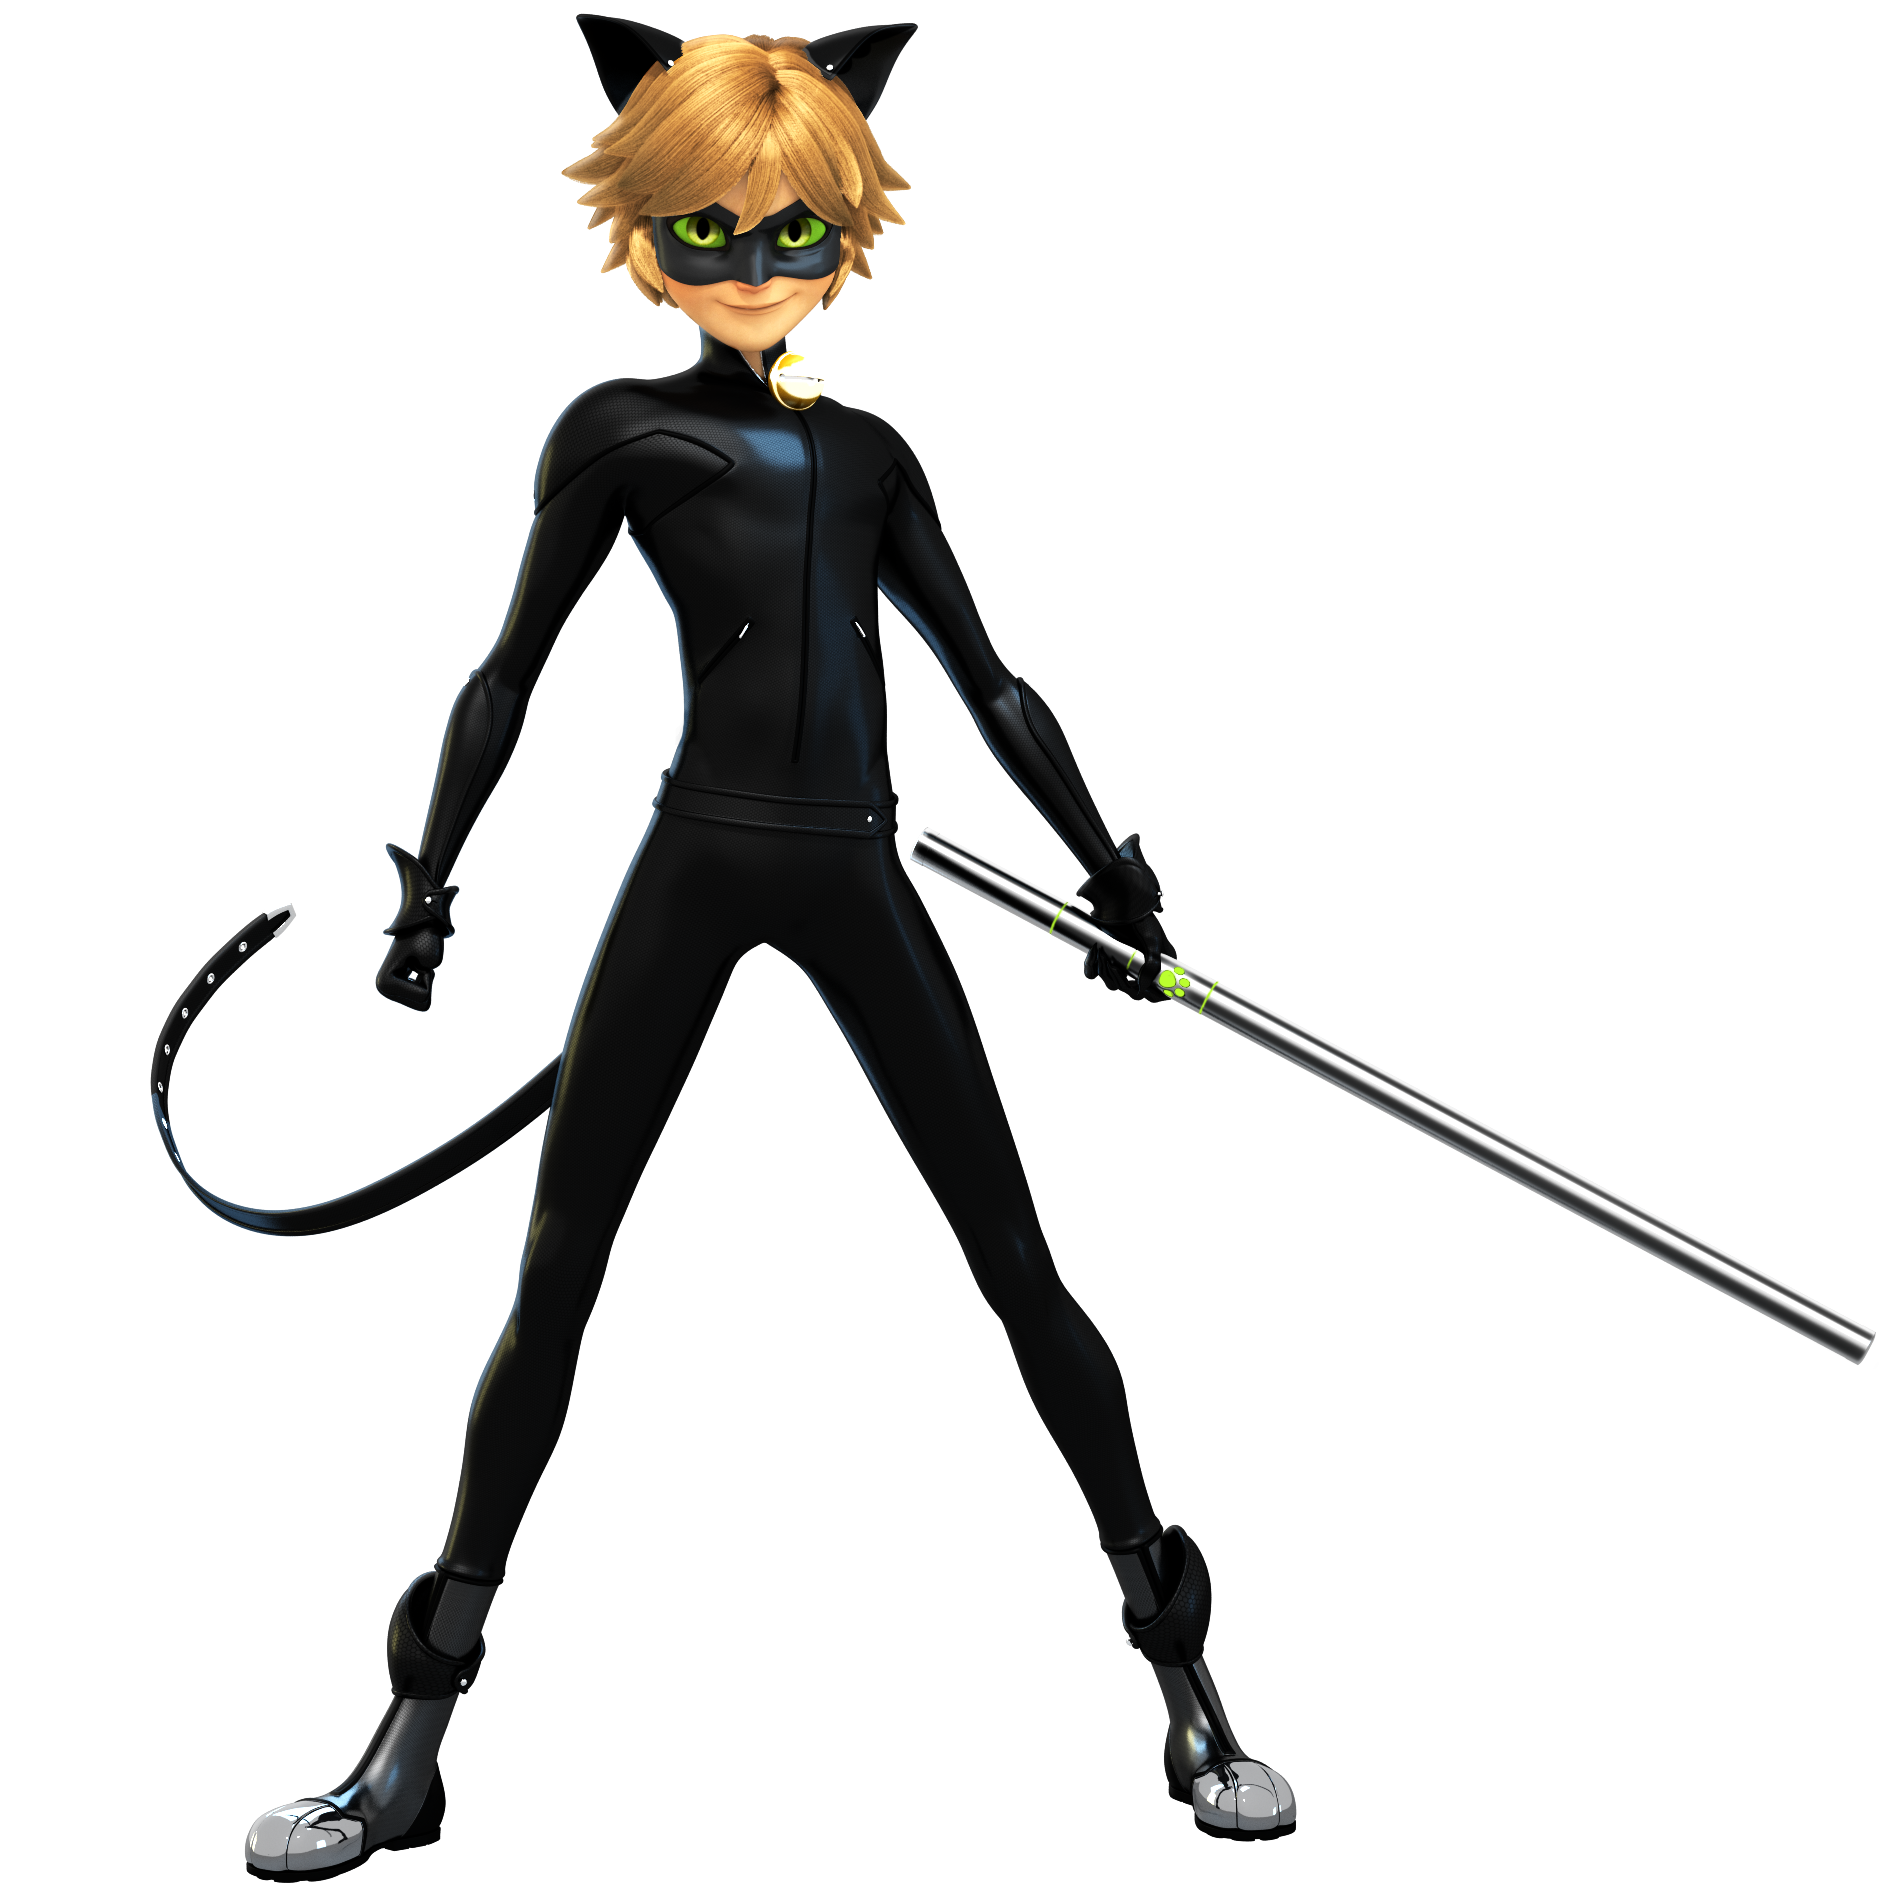 who is cat noir , one who is unsung crossword clue